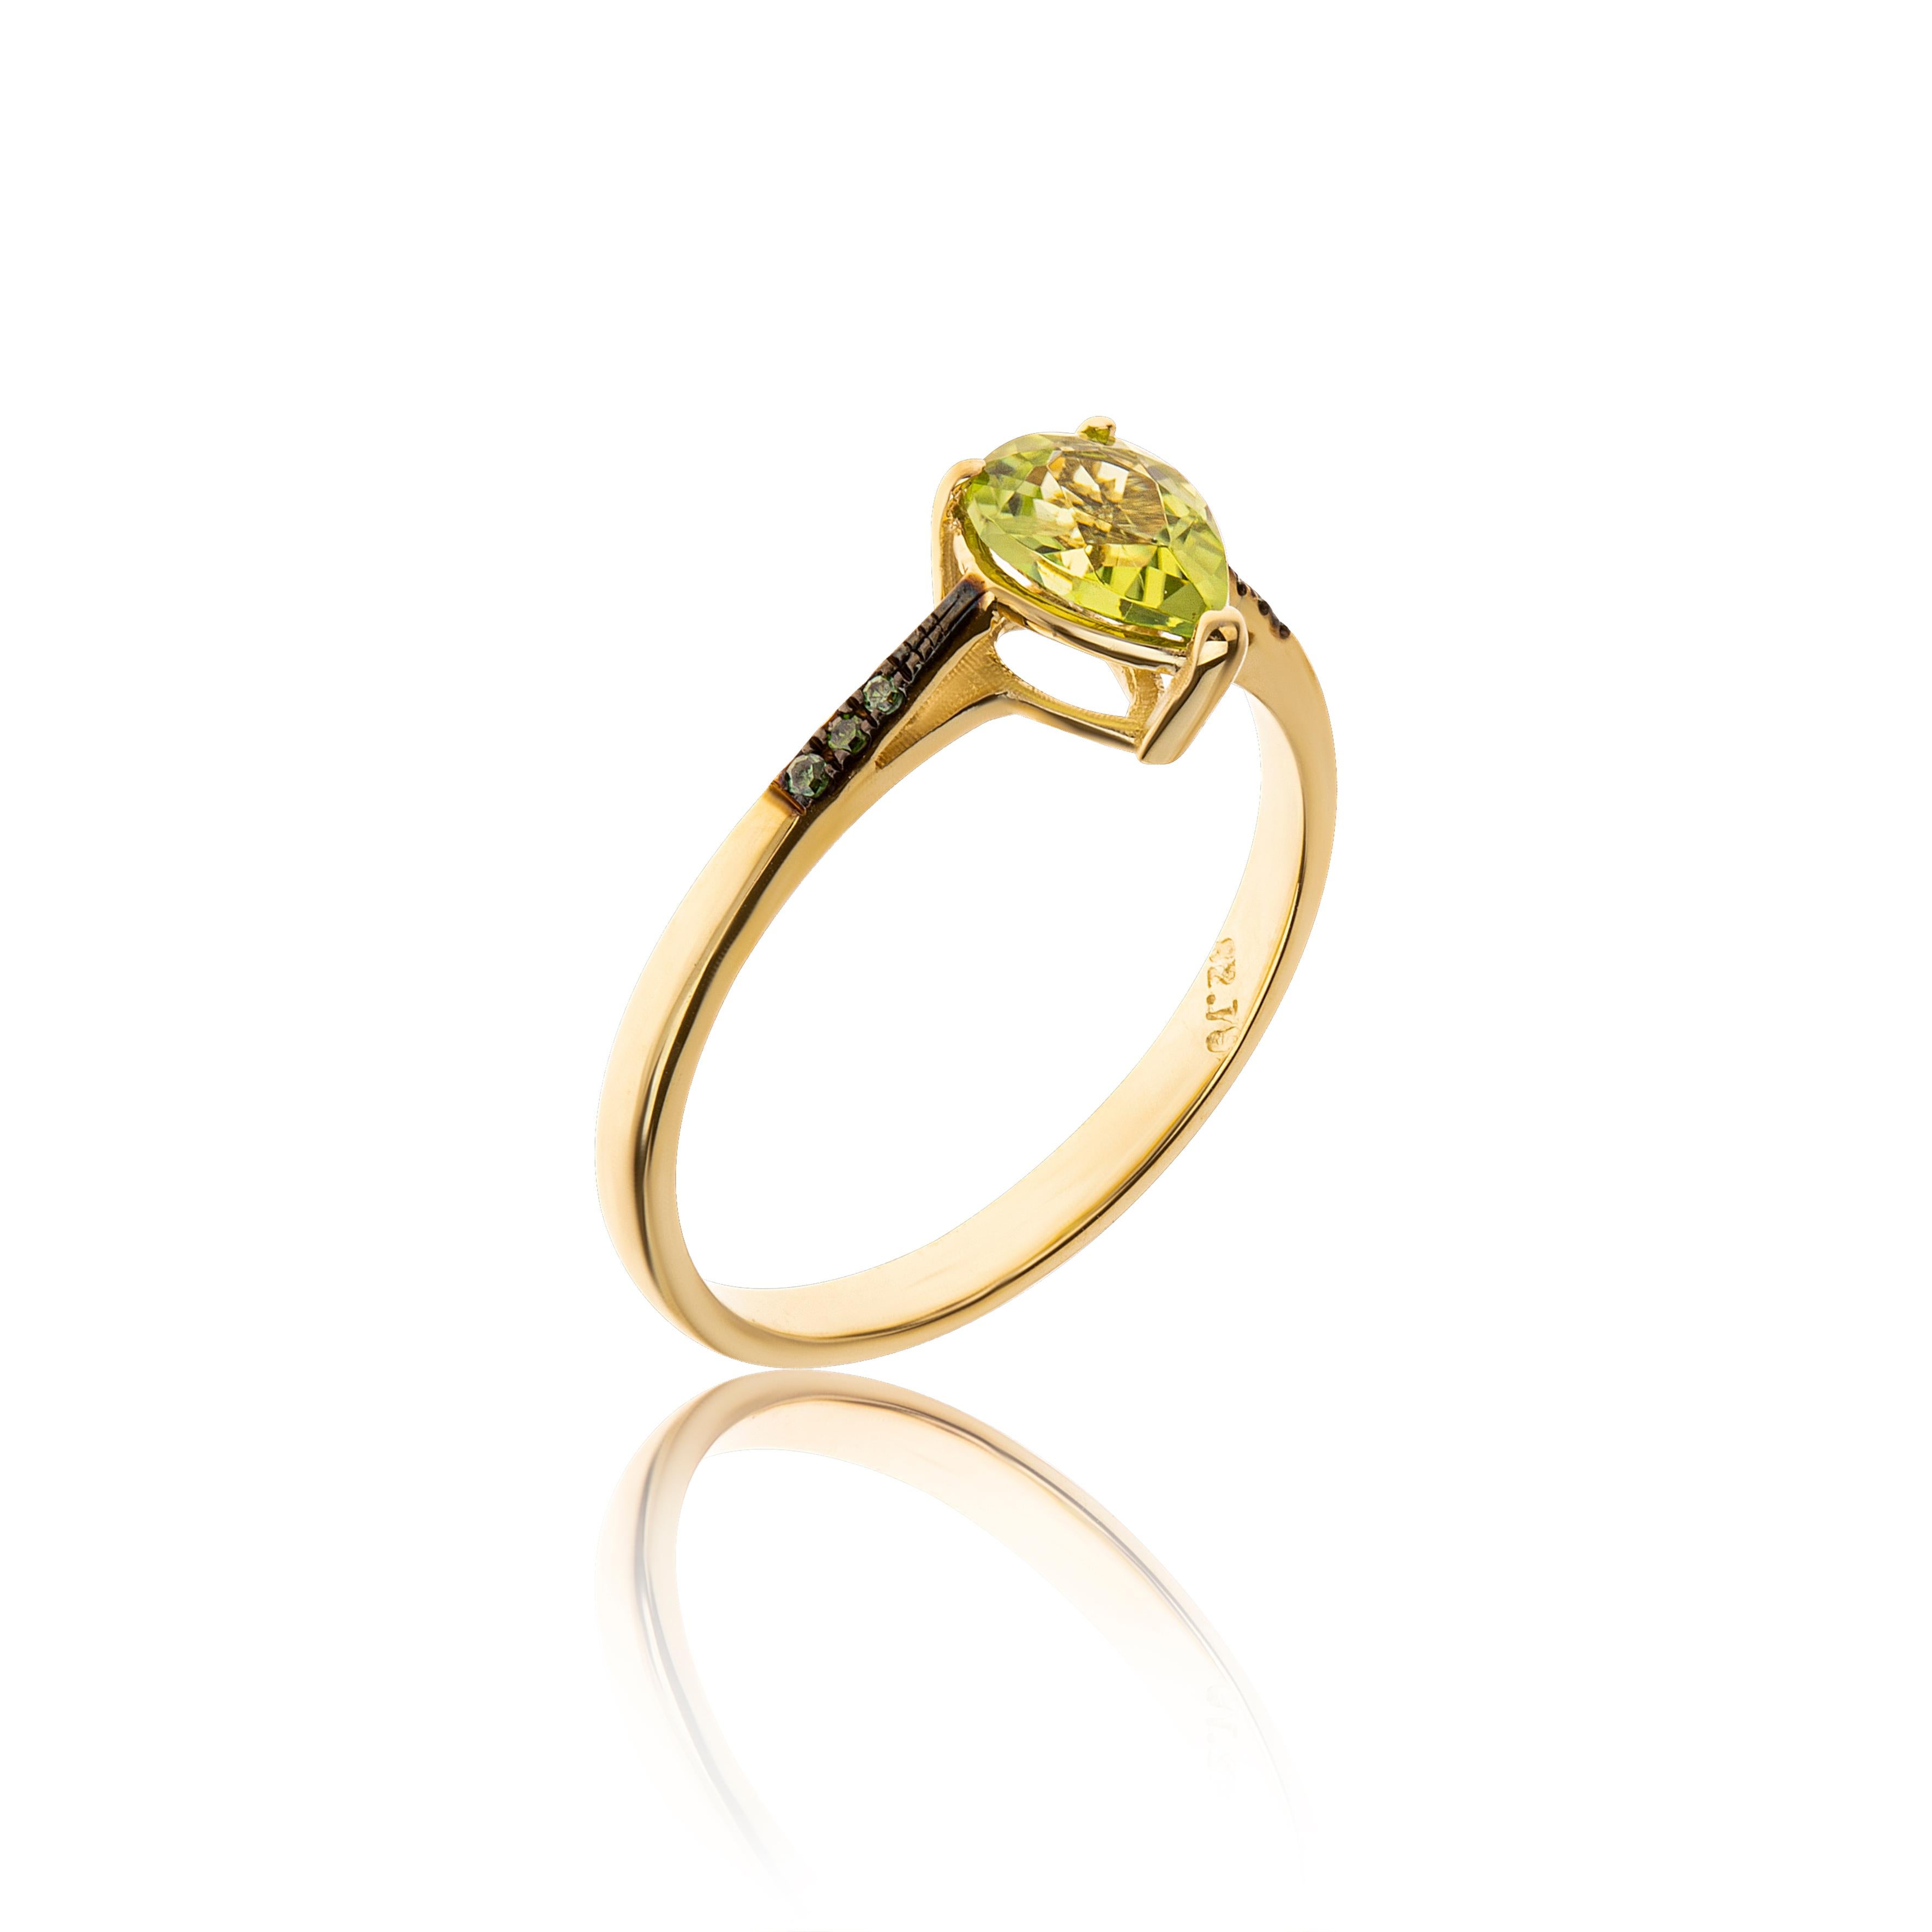 Peridot Pear Cut Ring with Green Diamonds Brilliant Cut Pave Setting in 18Kt Gold.
The central stone is a peridot, which is cut in pear shape. In the sides of the ring, blue diamonds in brilliant cut and in pave setting, give a different style in